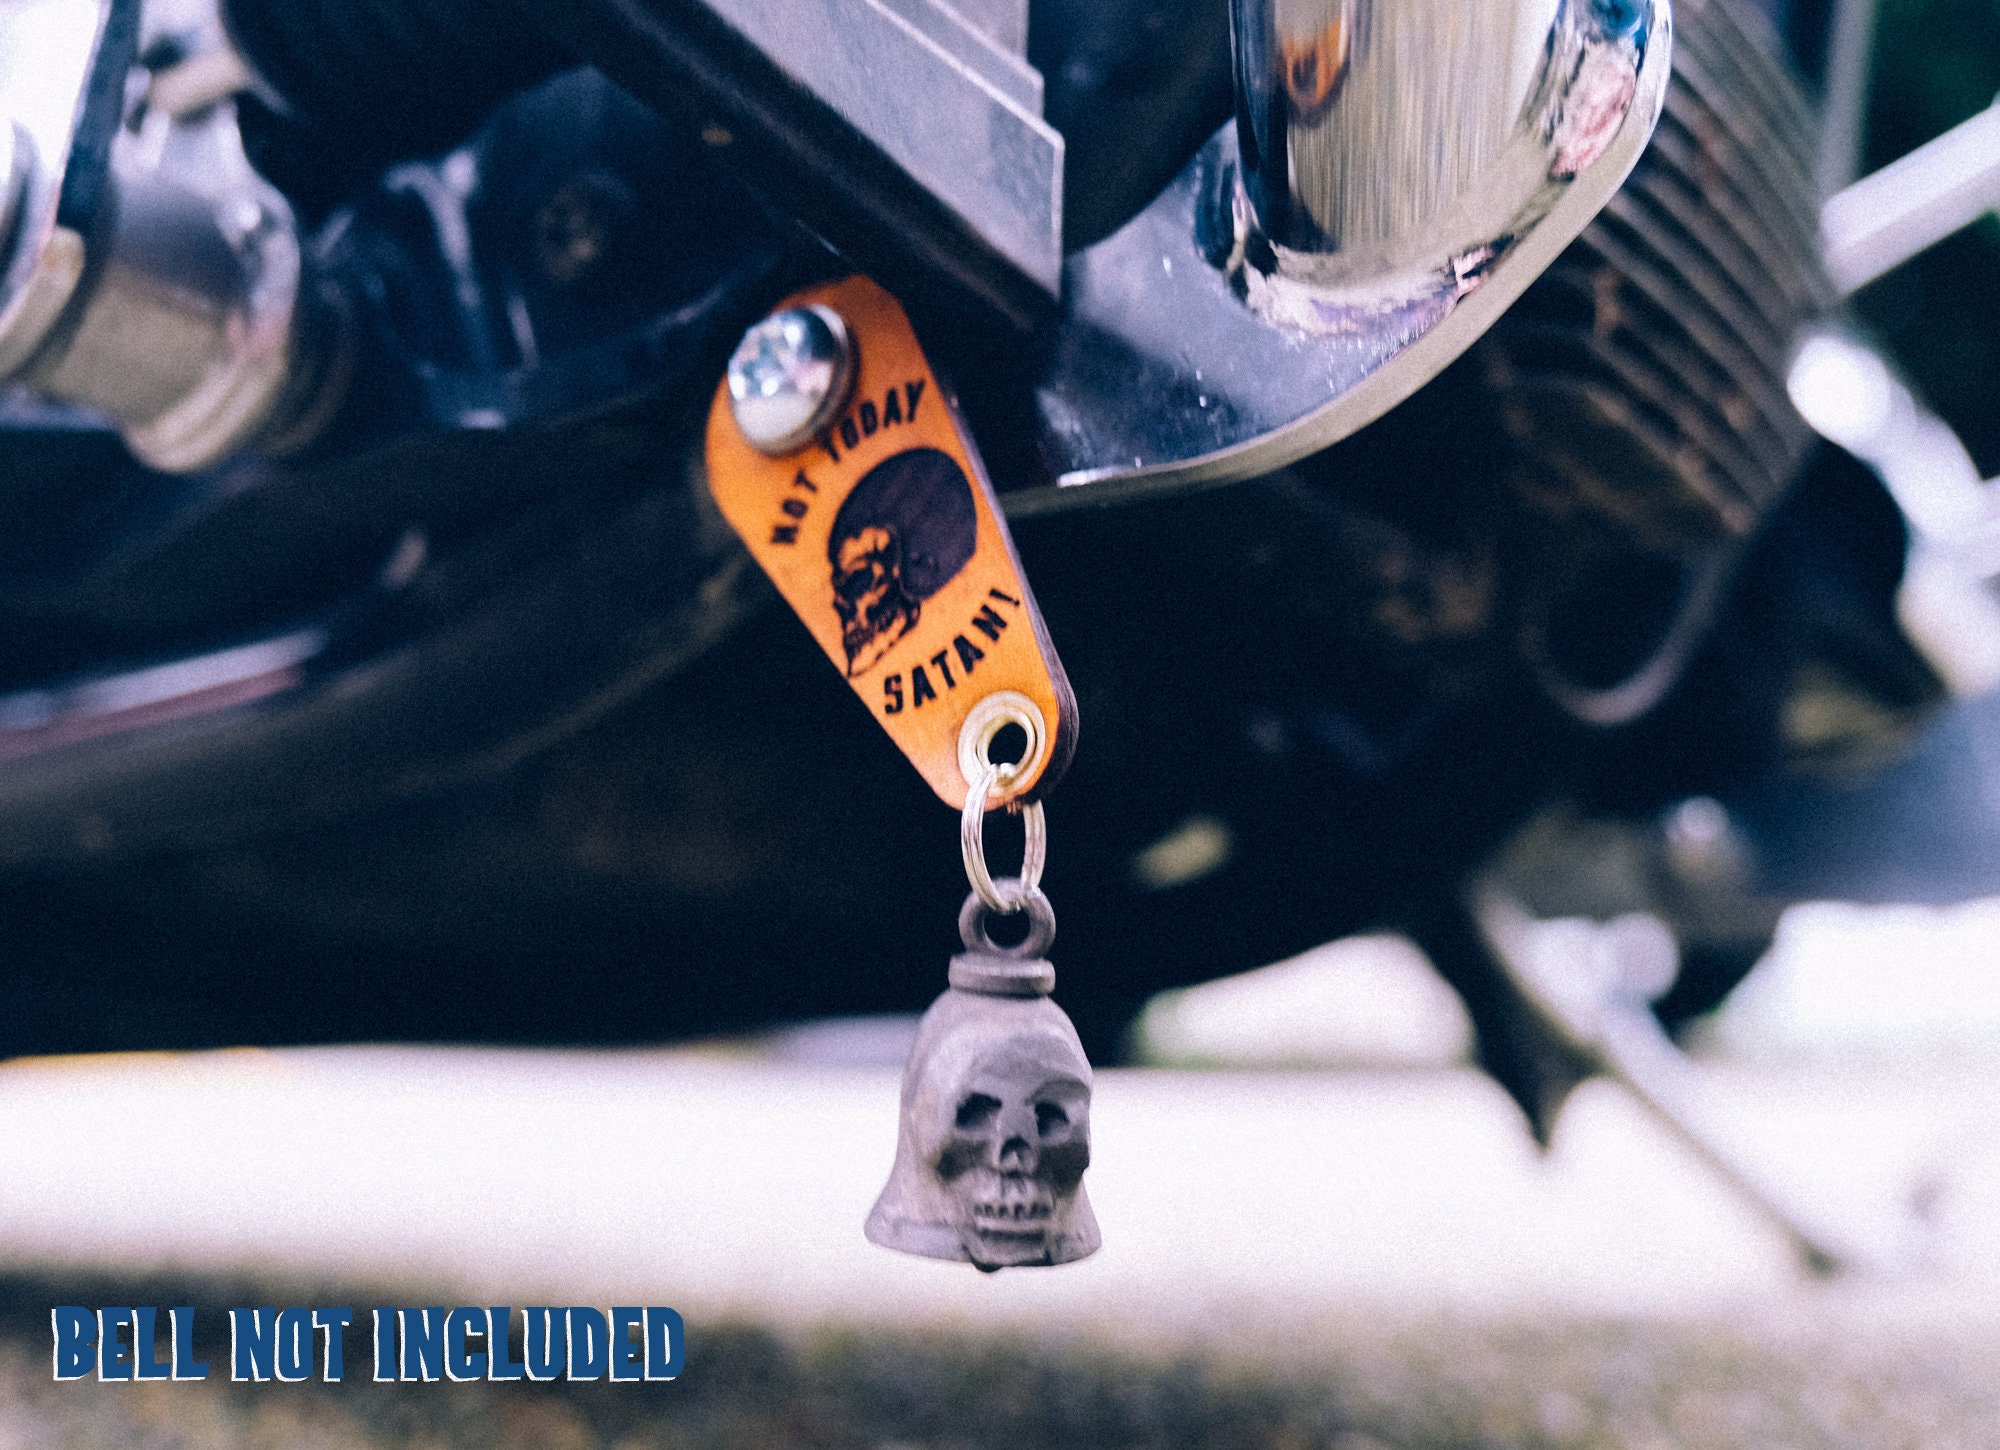 Guardian Bell Celtic Bell For Harley-Davidson – California Motorcycles